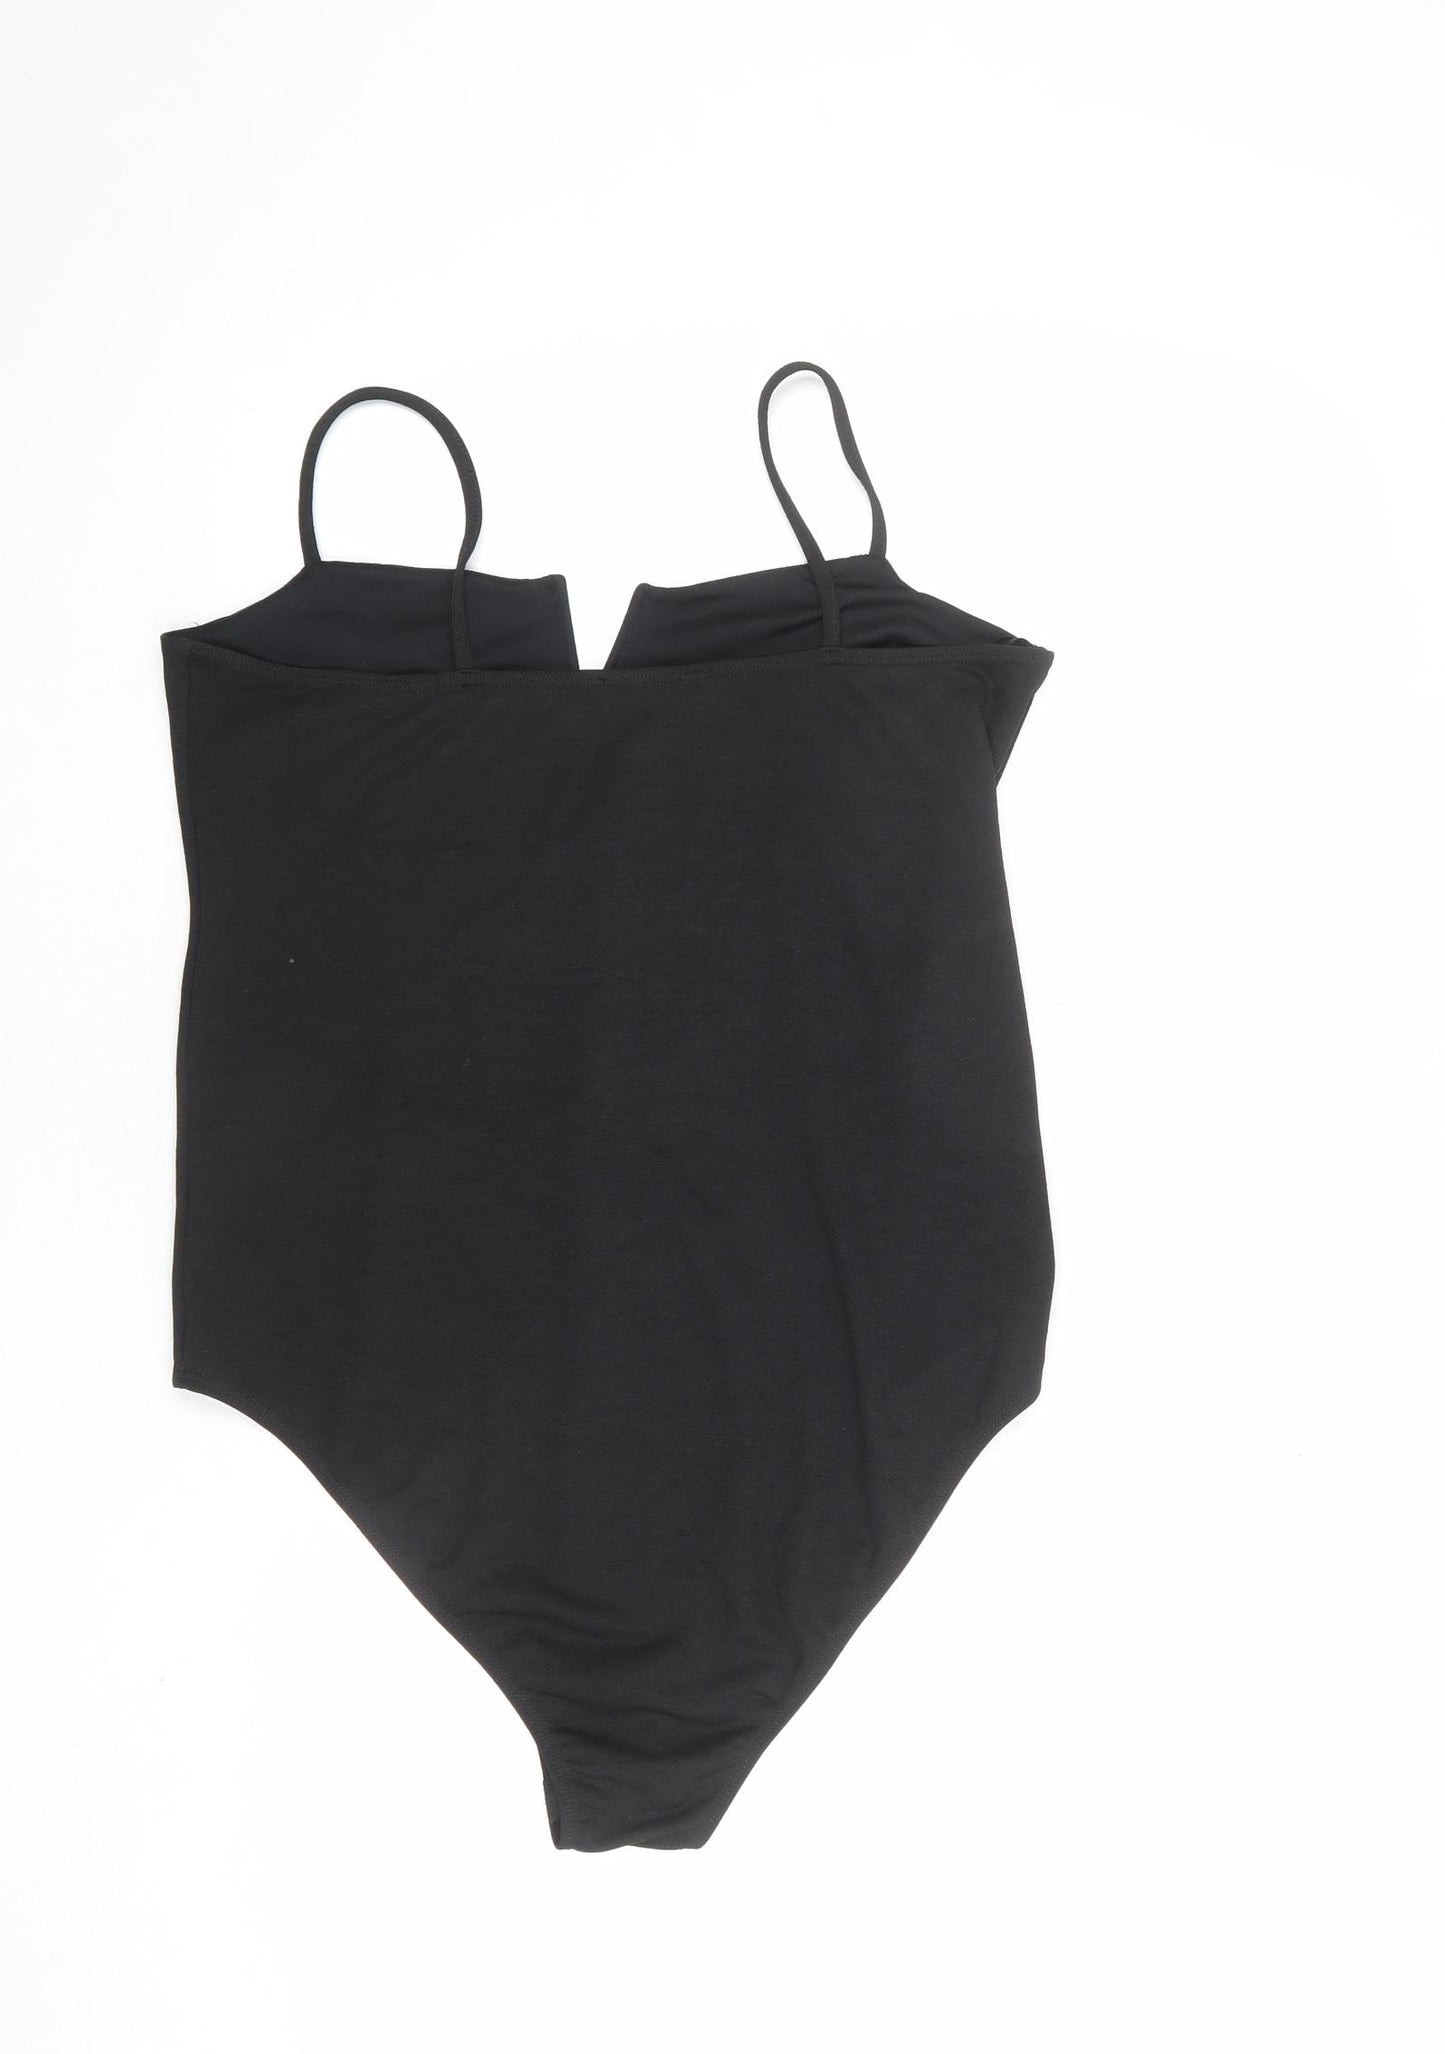 New Look Womens Black Polyester Bodysuit One-Piece Size 8 Snap